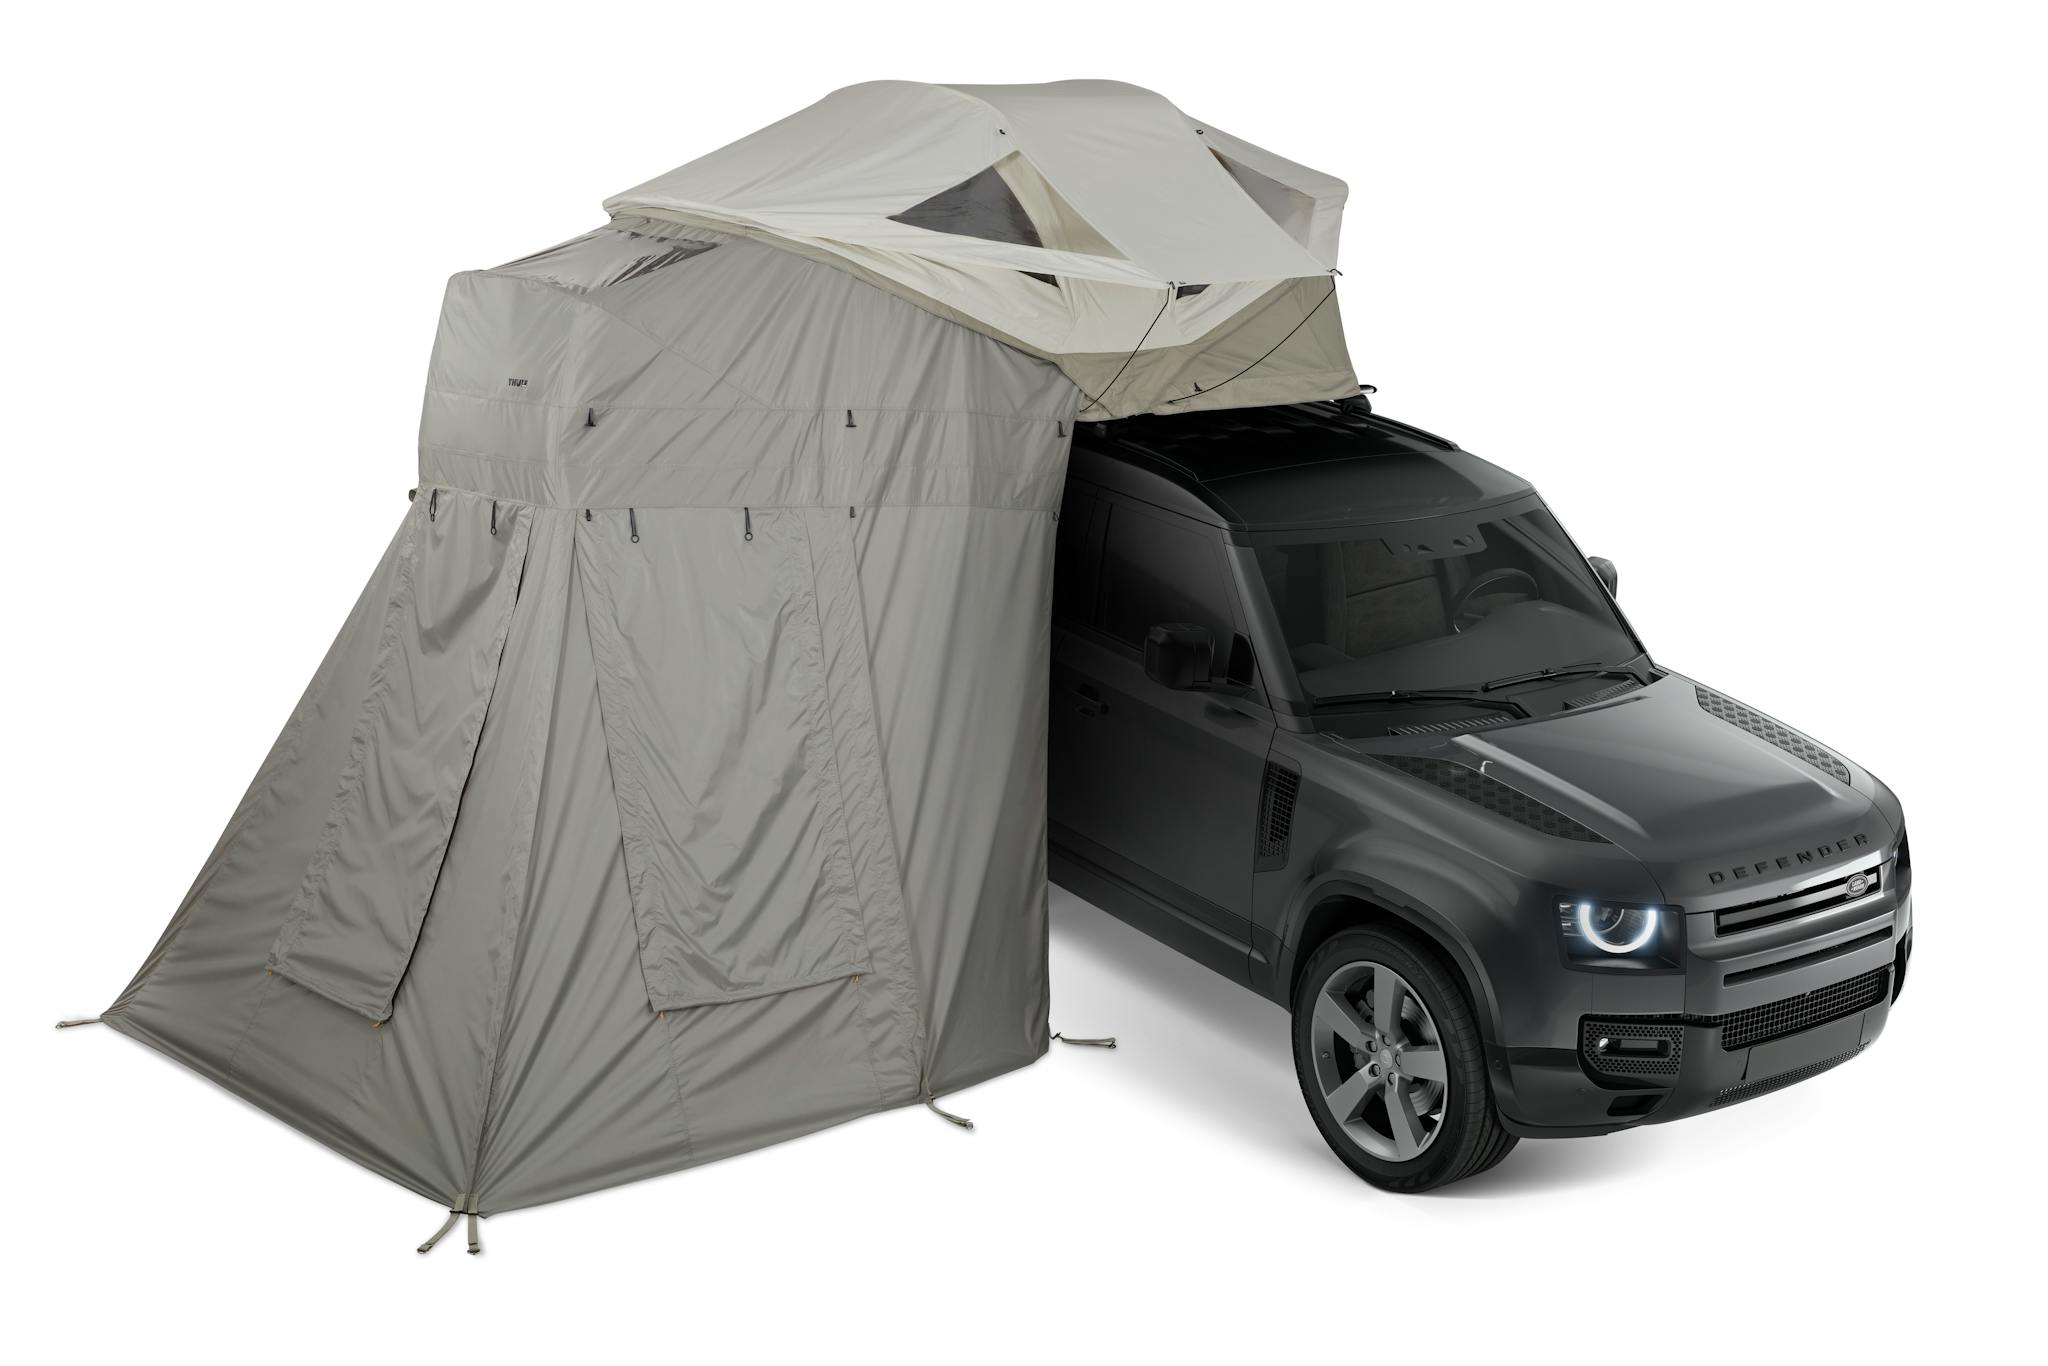 Thule Tent Accessories